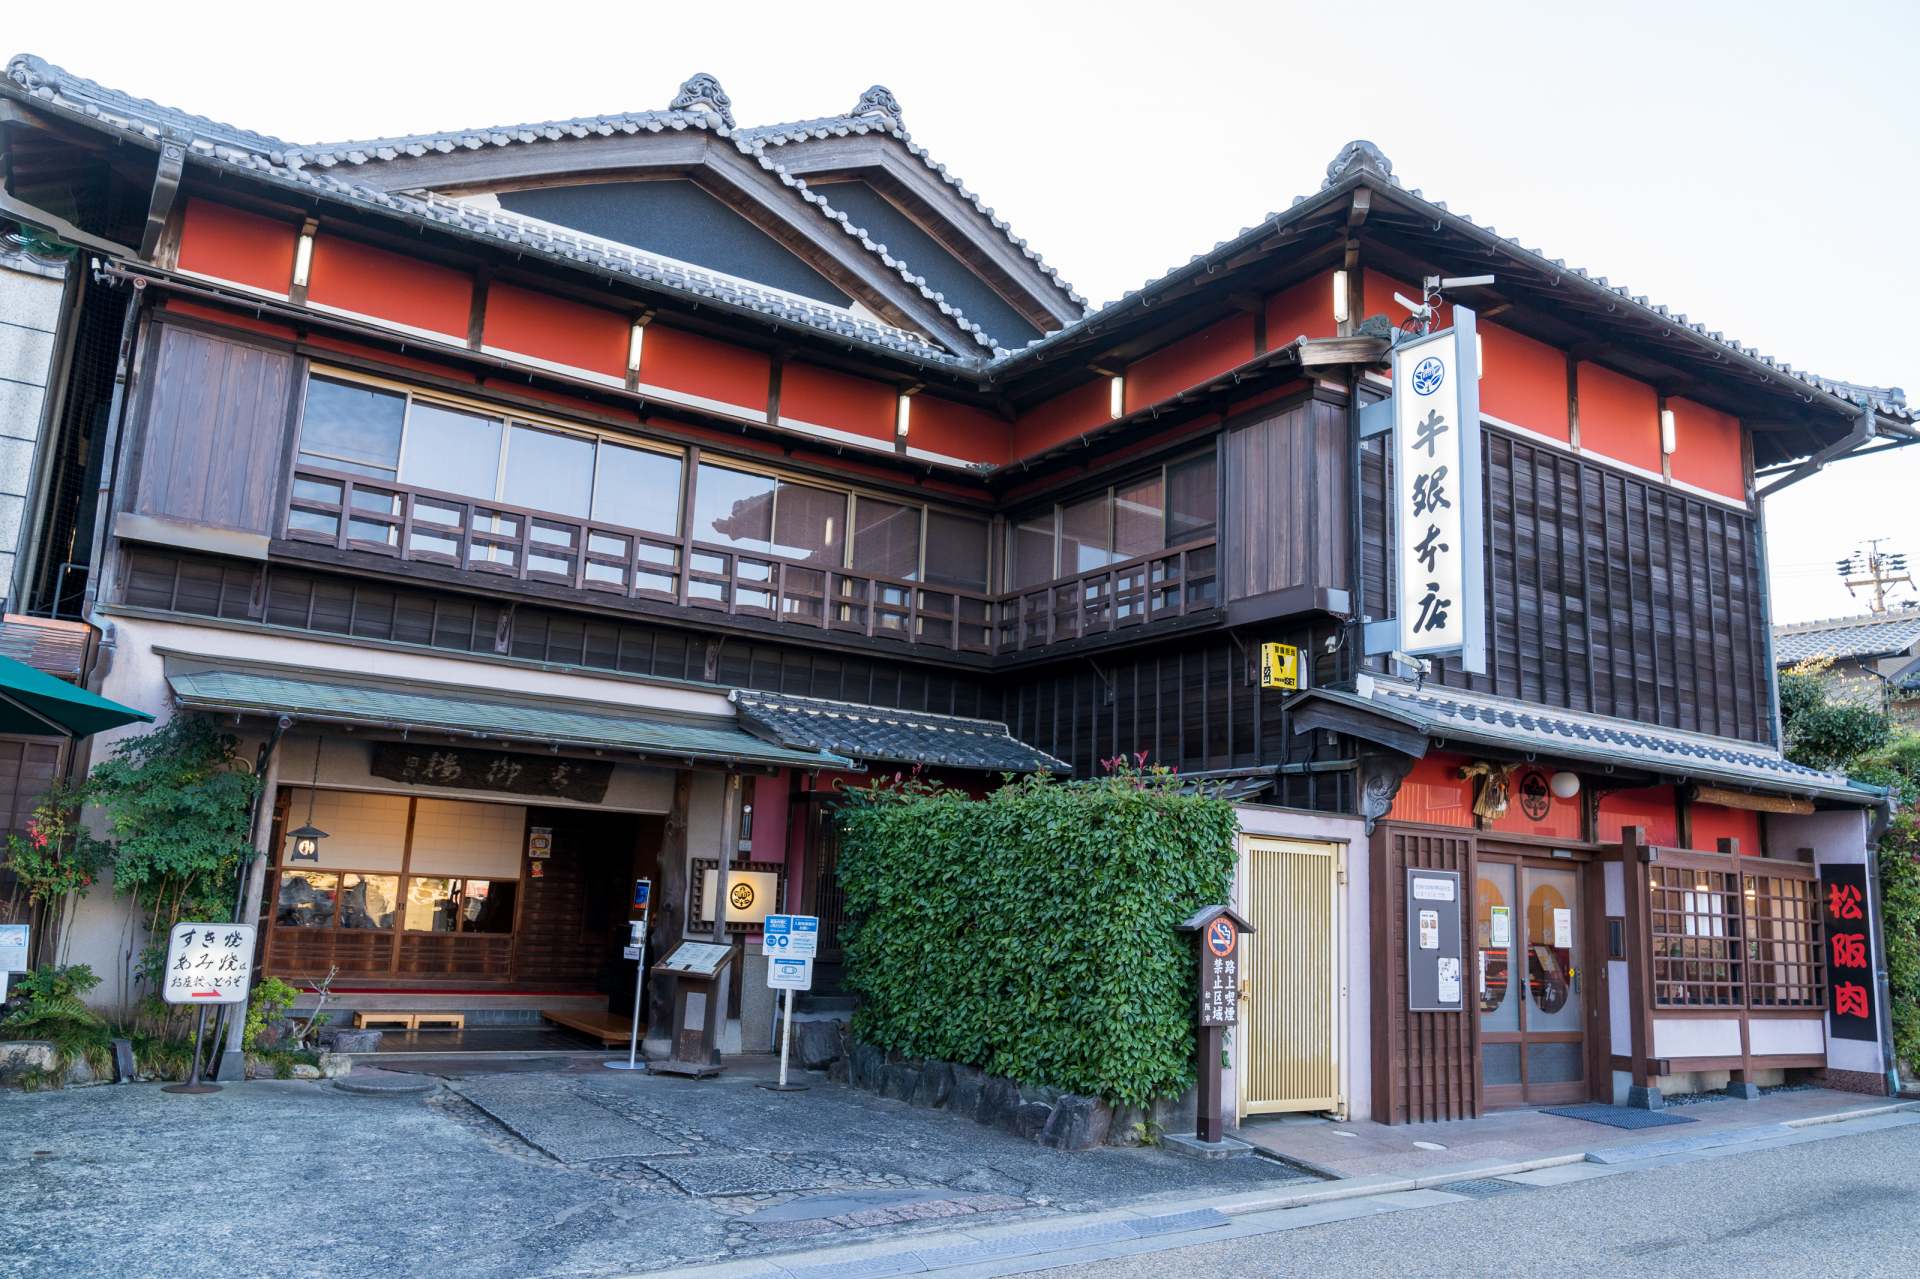 Stately Japanese architecture draws the eye on the historic street.